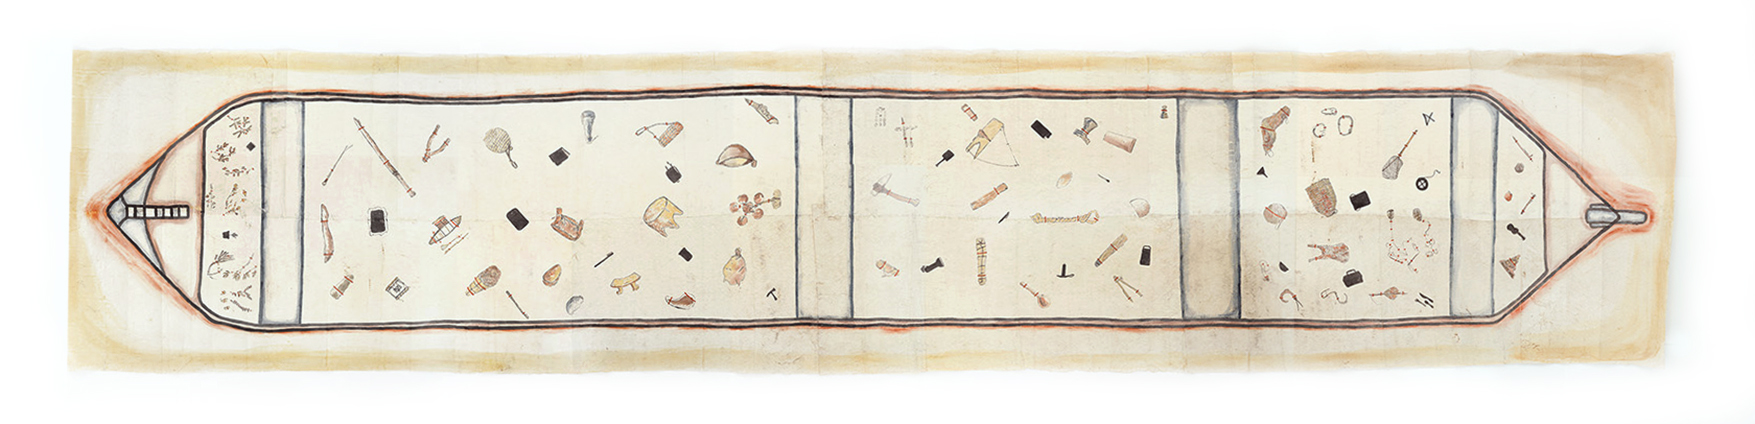 A long tapa cloth with a lot of symbols on it.